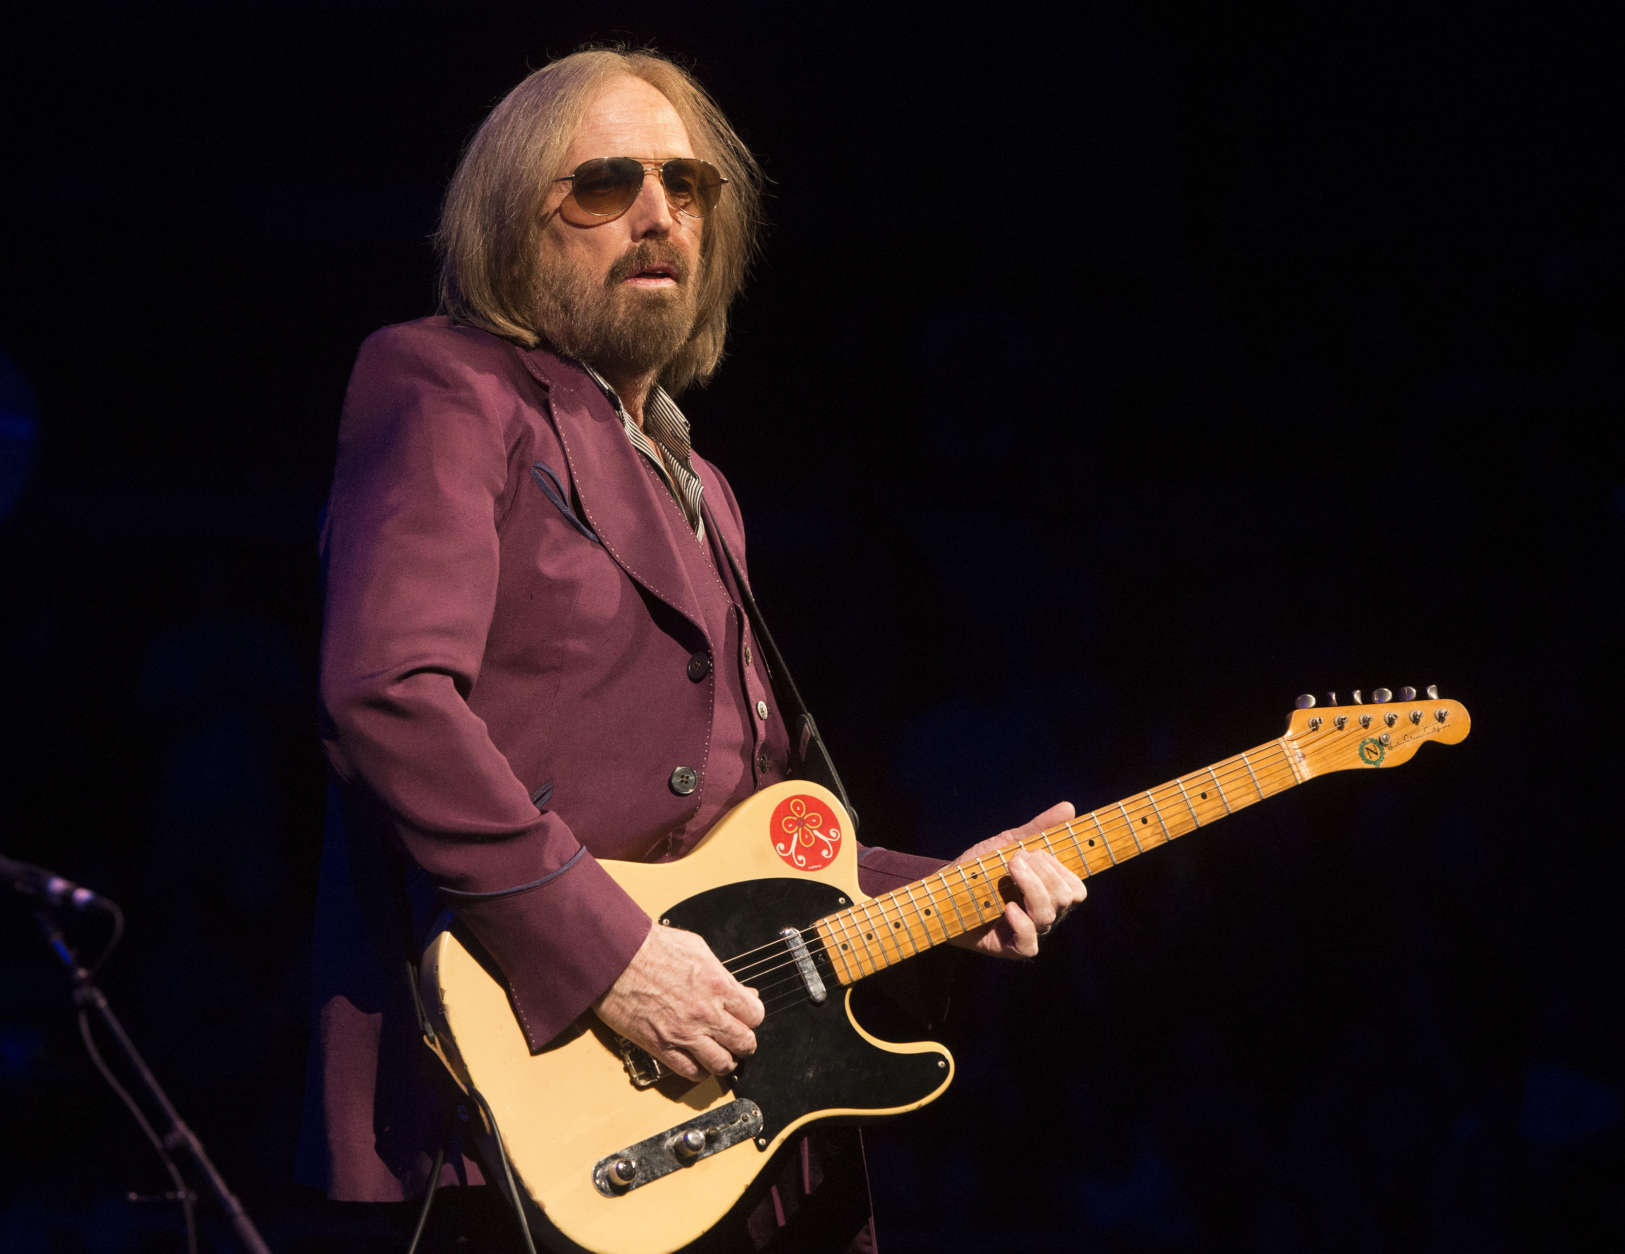 Tom Petty of Tom Petty and the Heartbreakers performs in concert during their "40th Anniversary Tour" at The Wells Fargo Center on Saturday, July 1, 2017, in Philadelphia. (Photo by Owen Sweeney/Invision/AP)